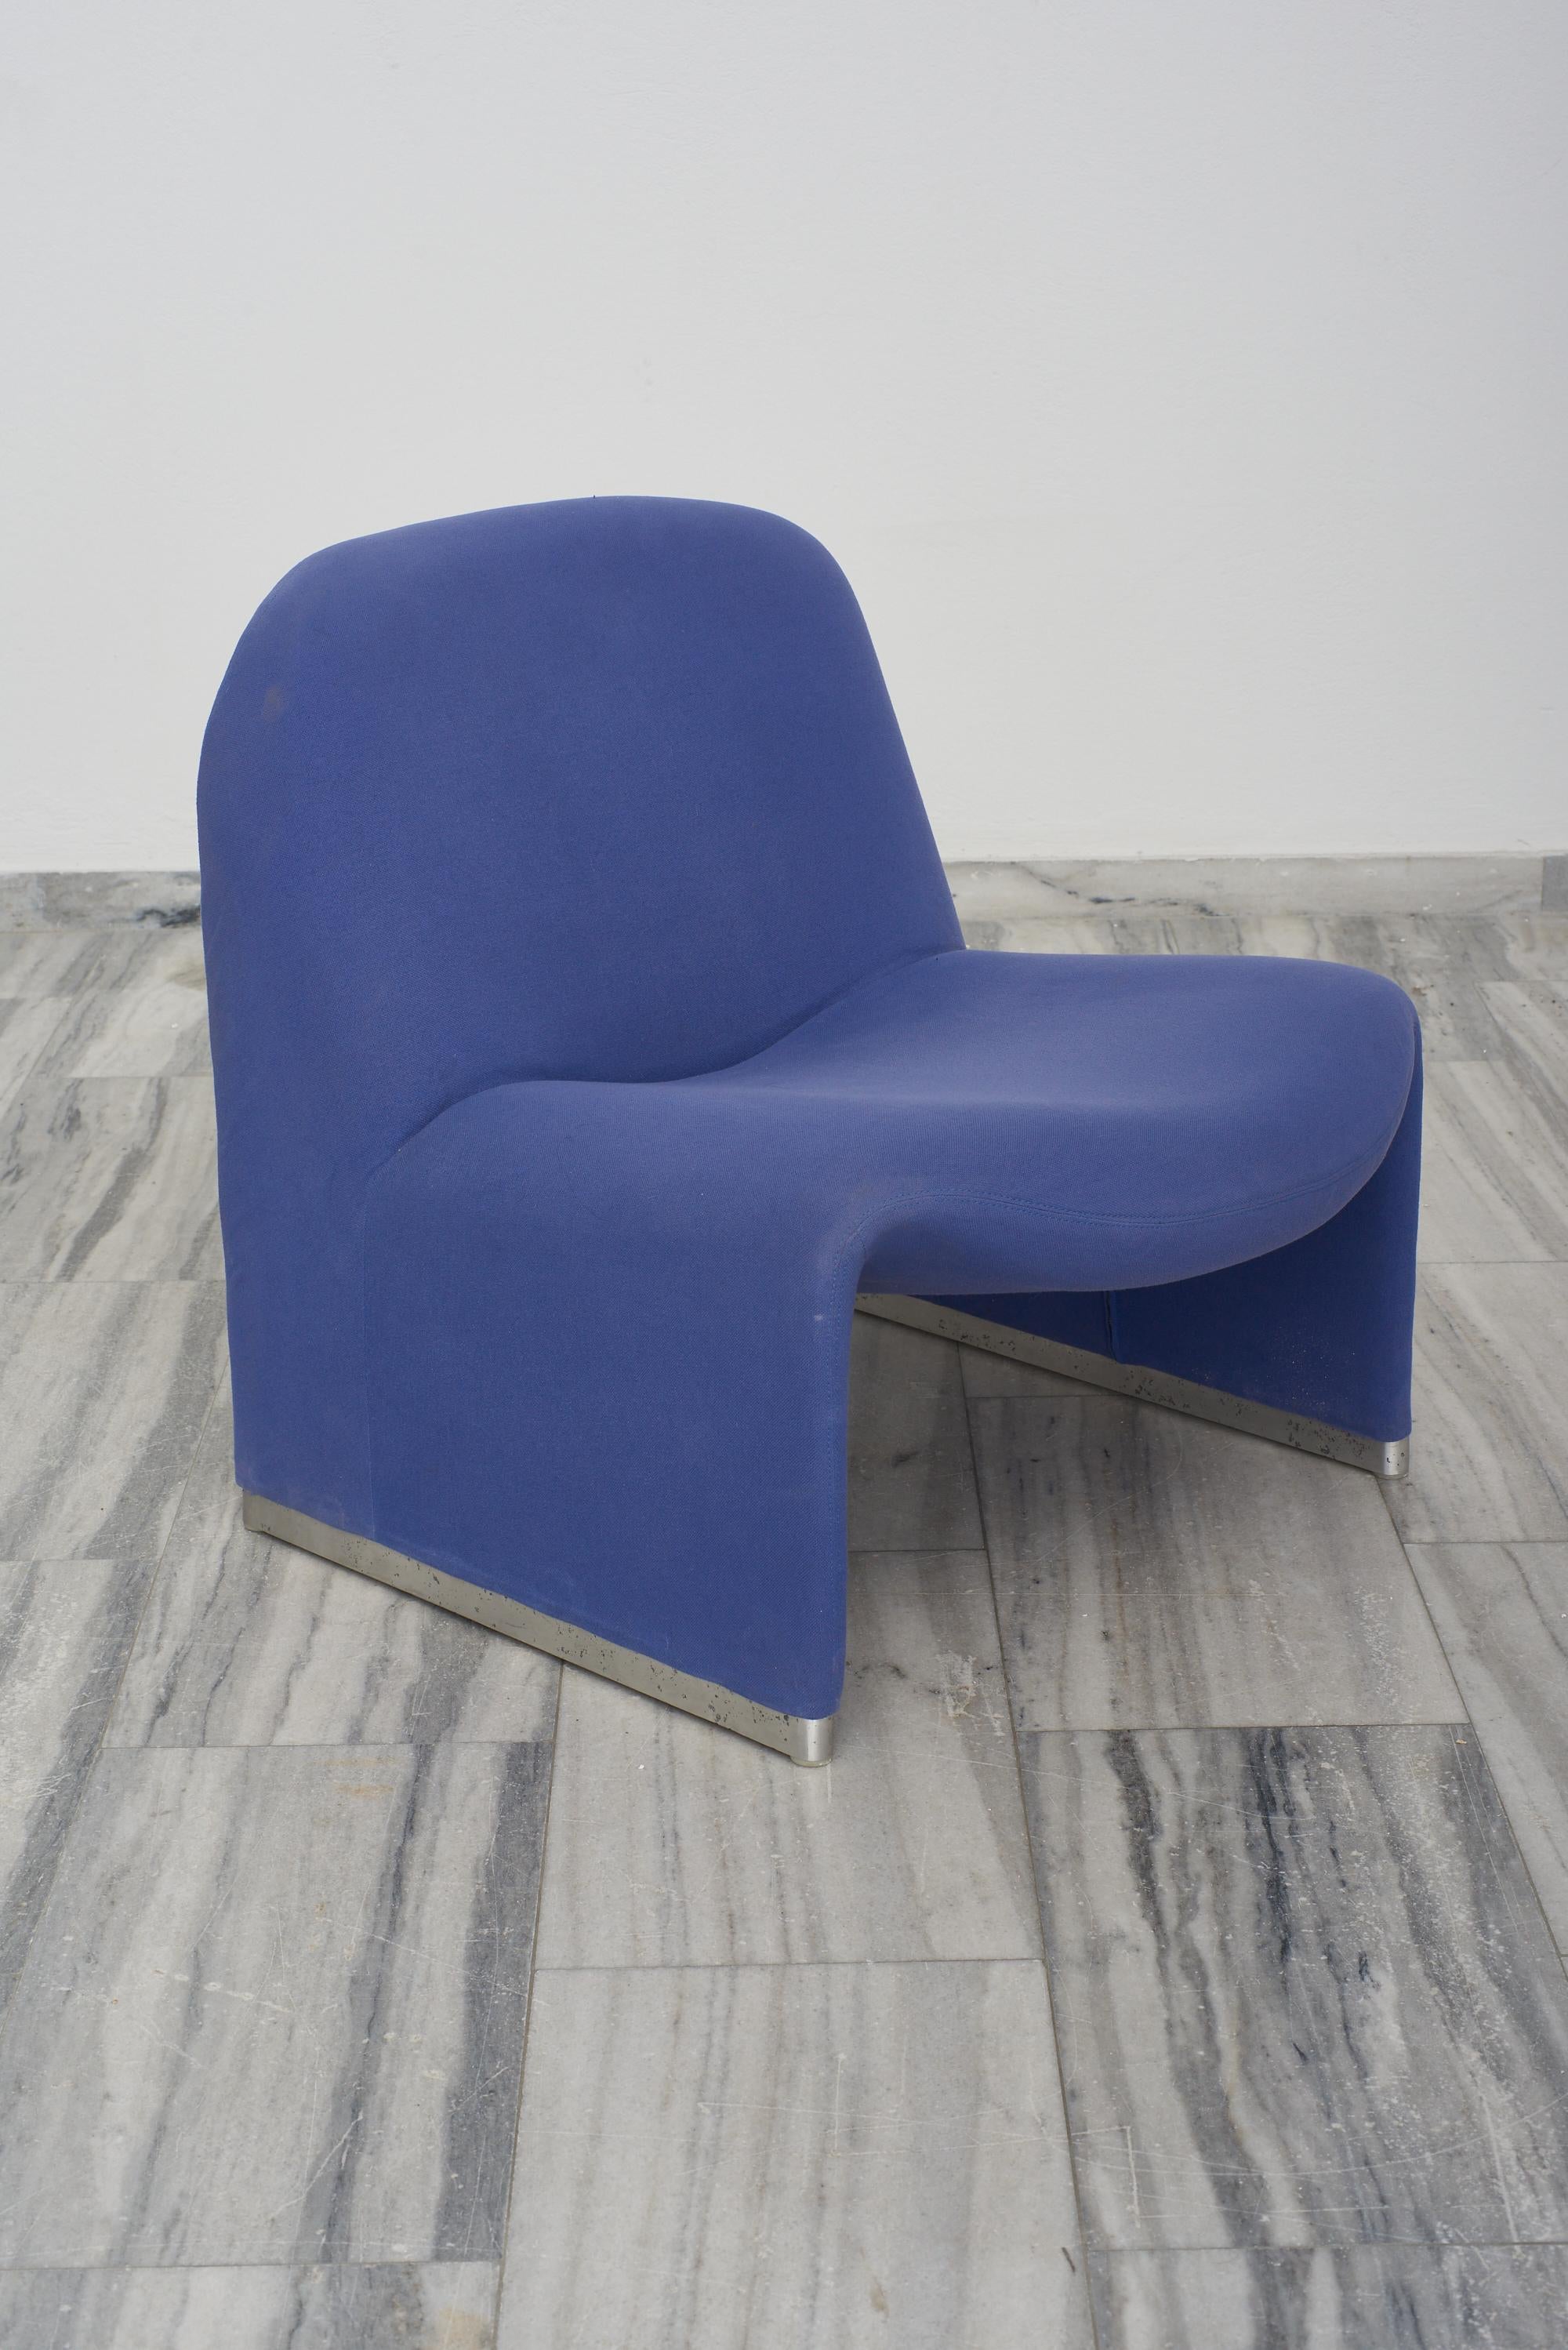 Blueberry purple Alky chairs by Giancarlo Piretti for Castelli, Italy 1969.
The Alky Chair was exhibited with the Piretti Collection at Neocon in 1988.